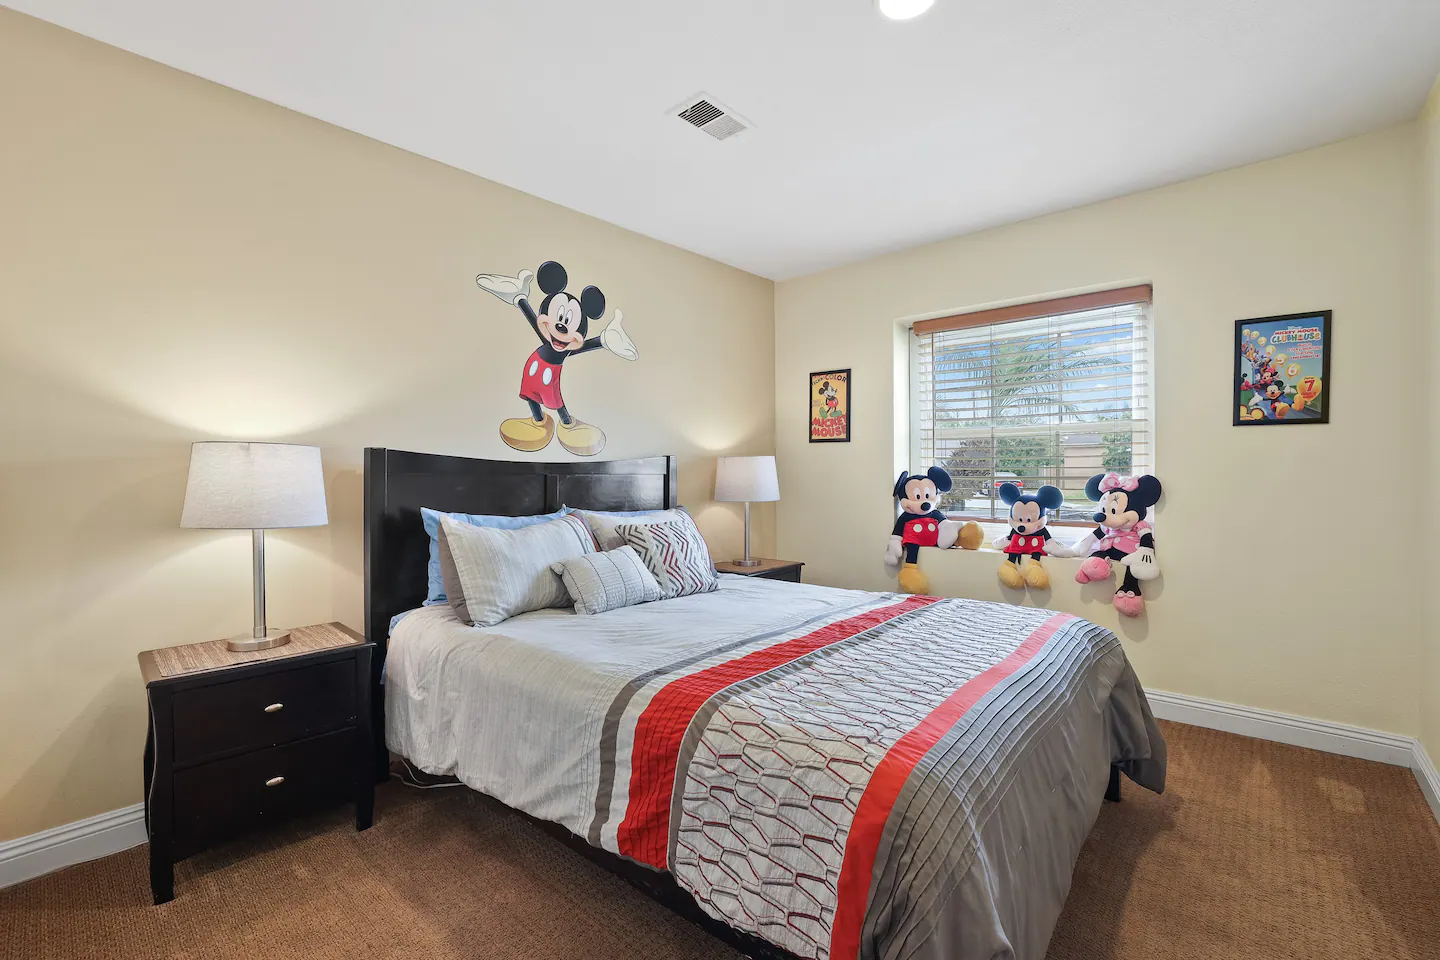 Guest bedroom that is mickey mouse-themed